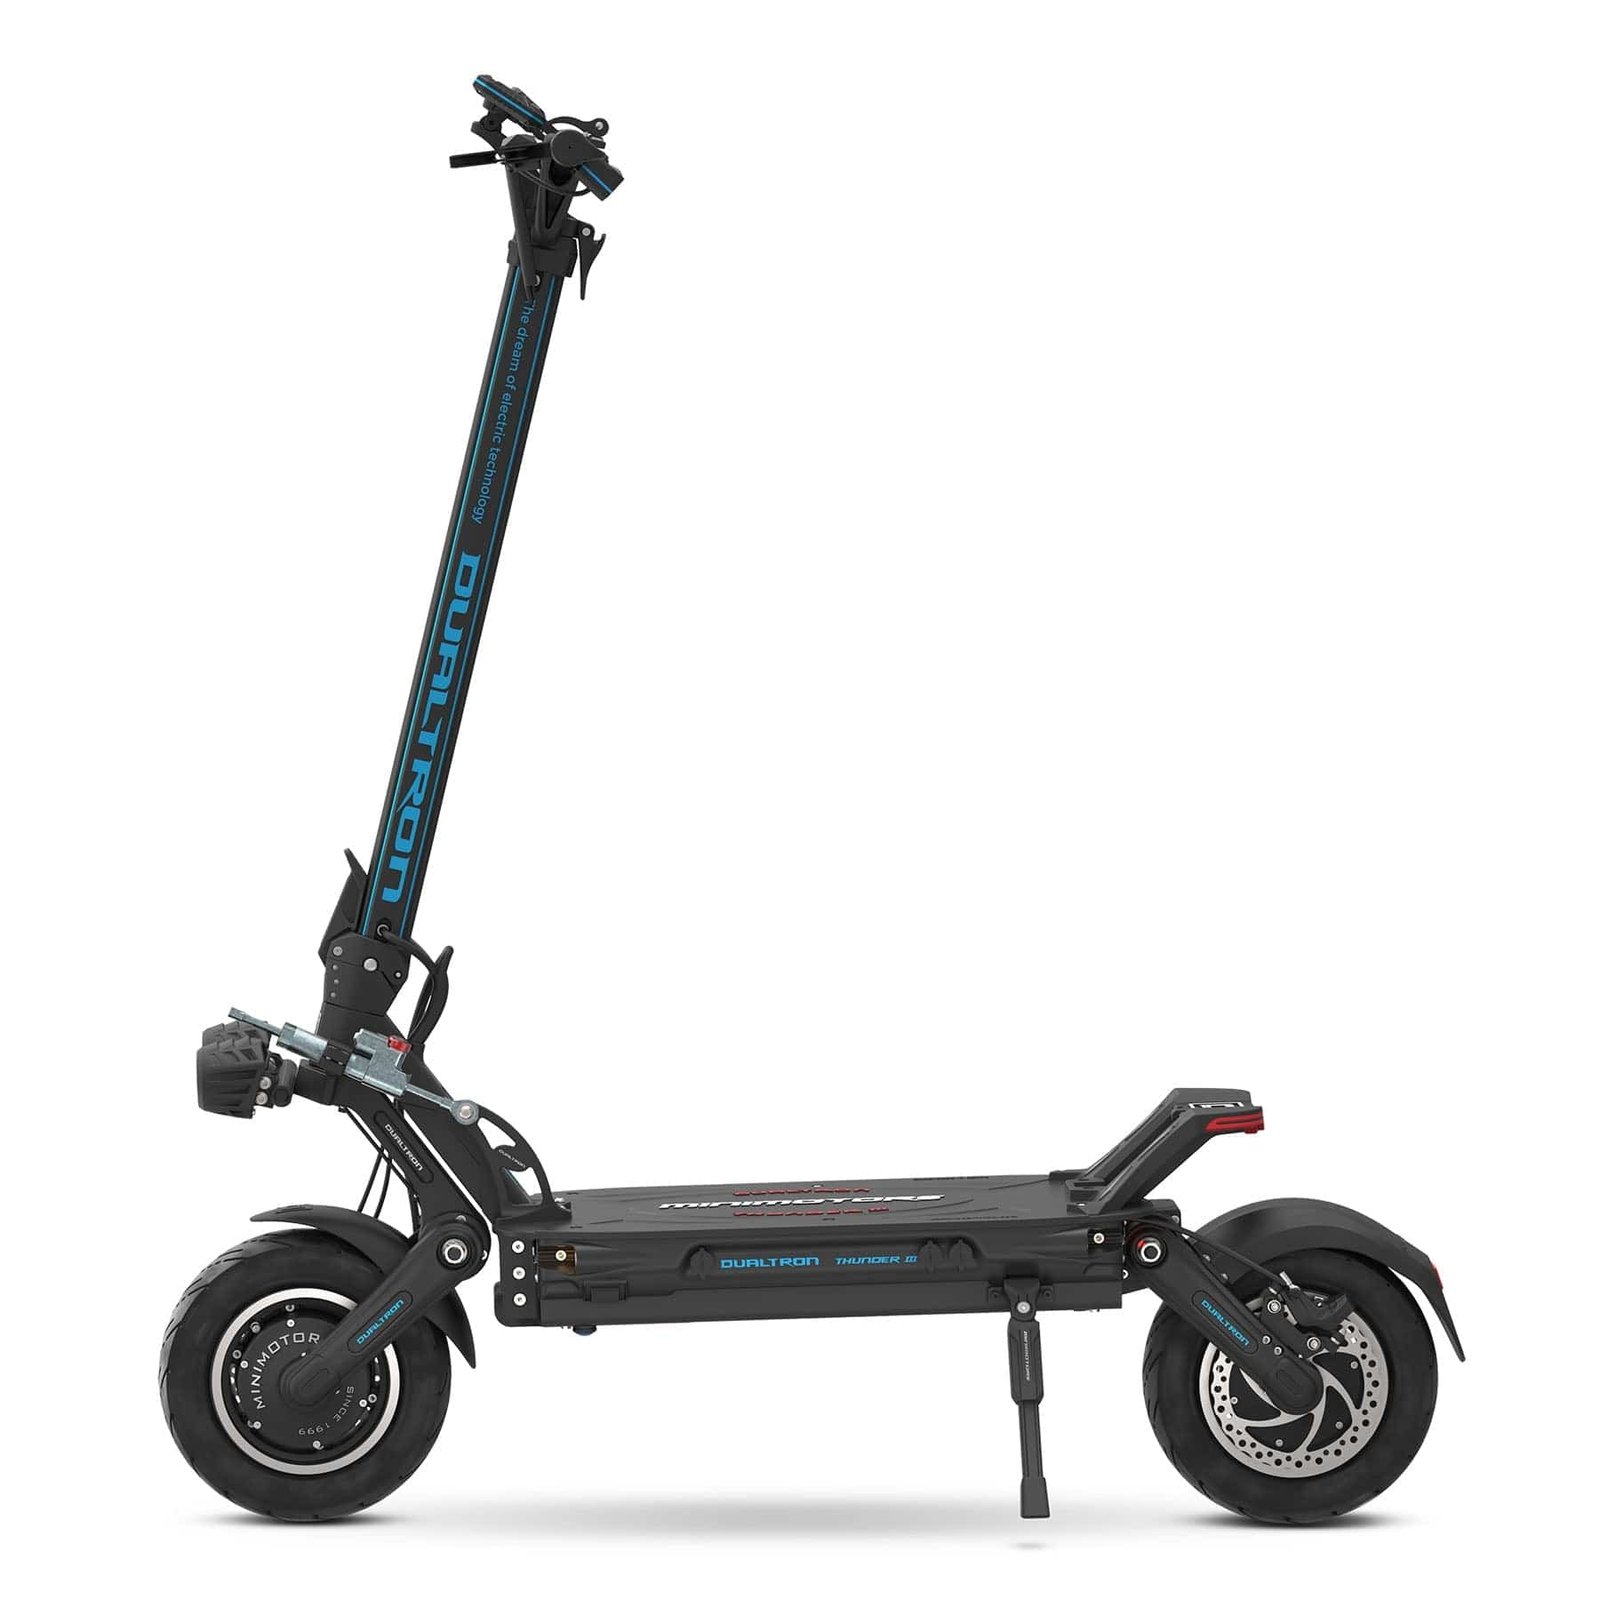 dualtron-thunder-3-electric-scooter-side_2000x